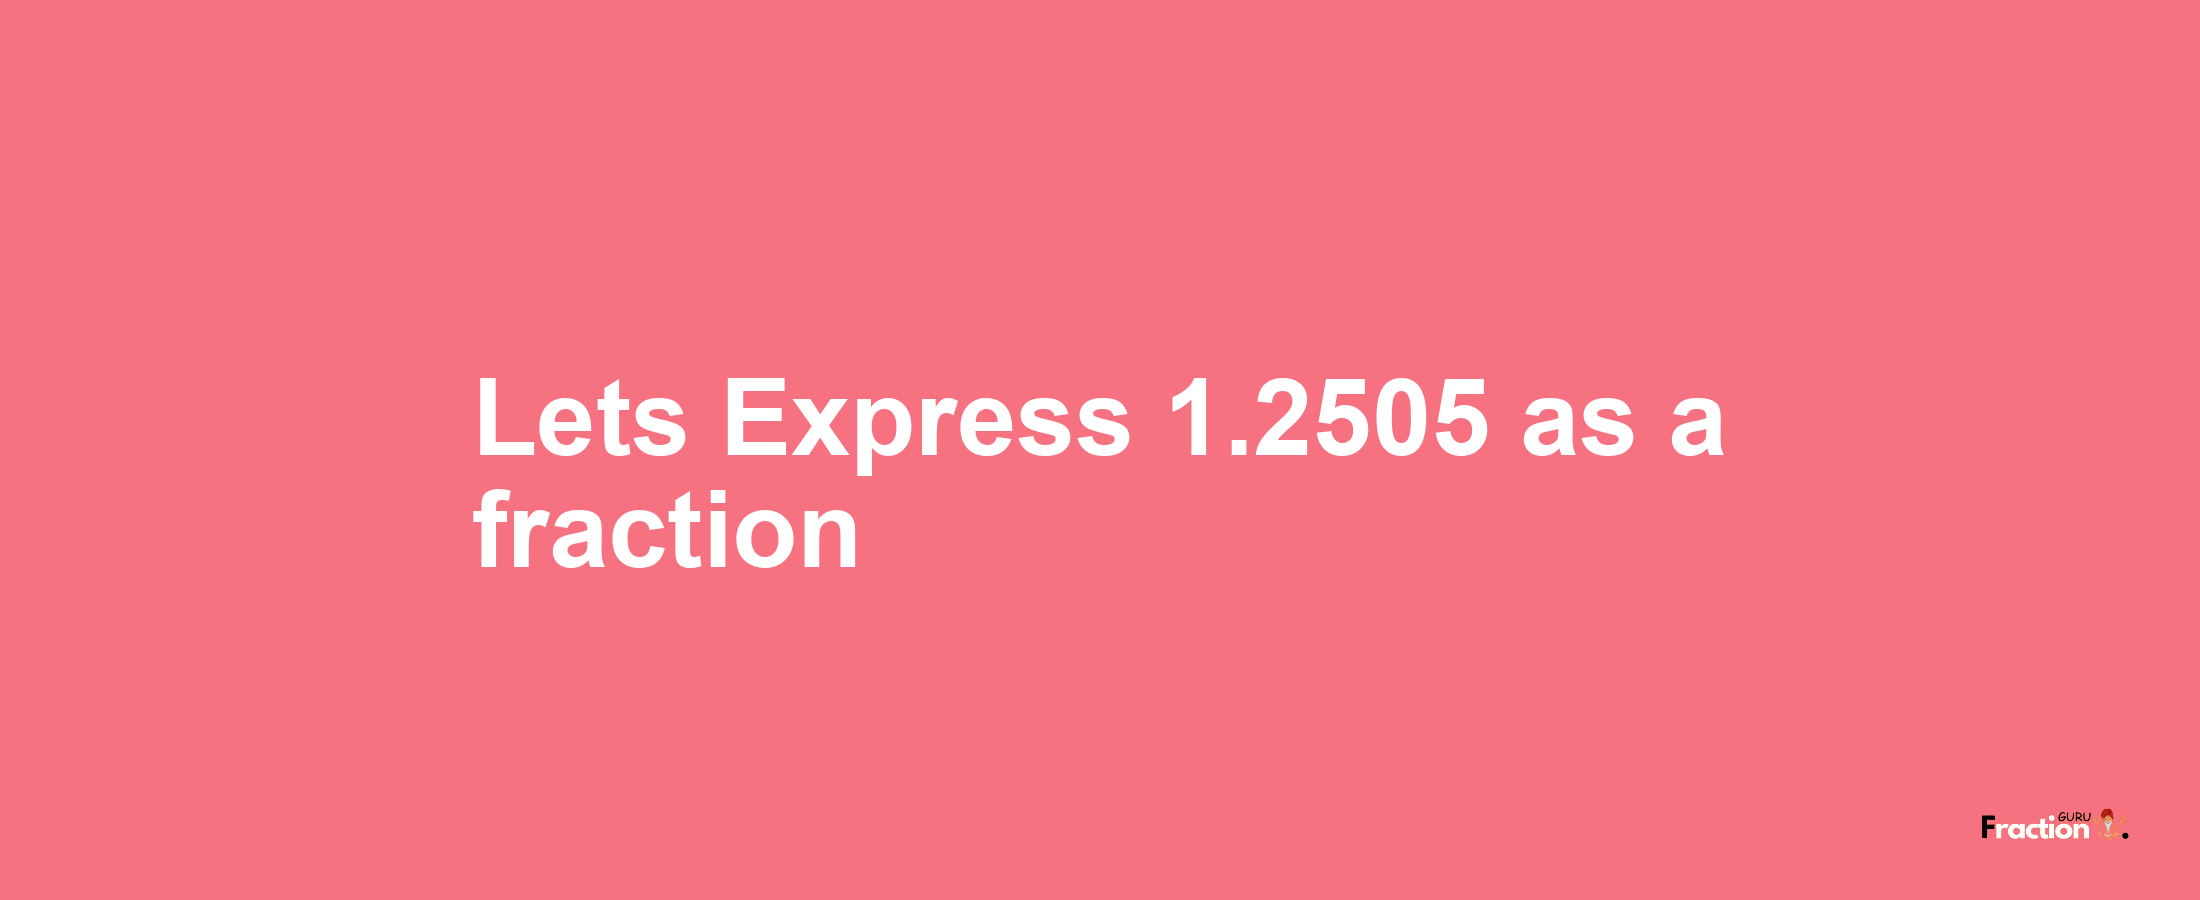 Lets Express 1.2505 as afraction